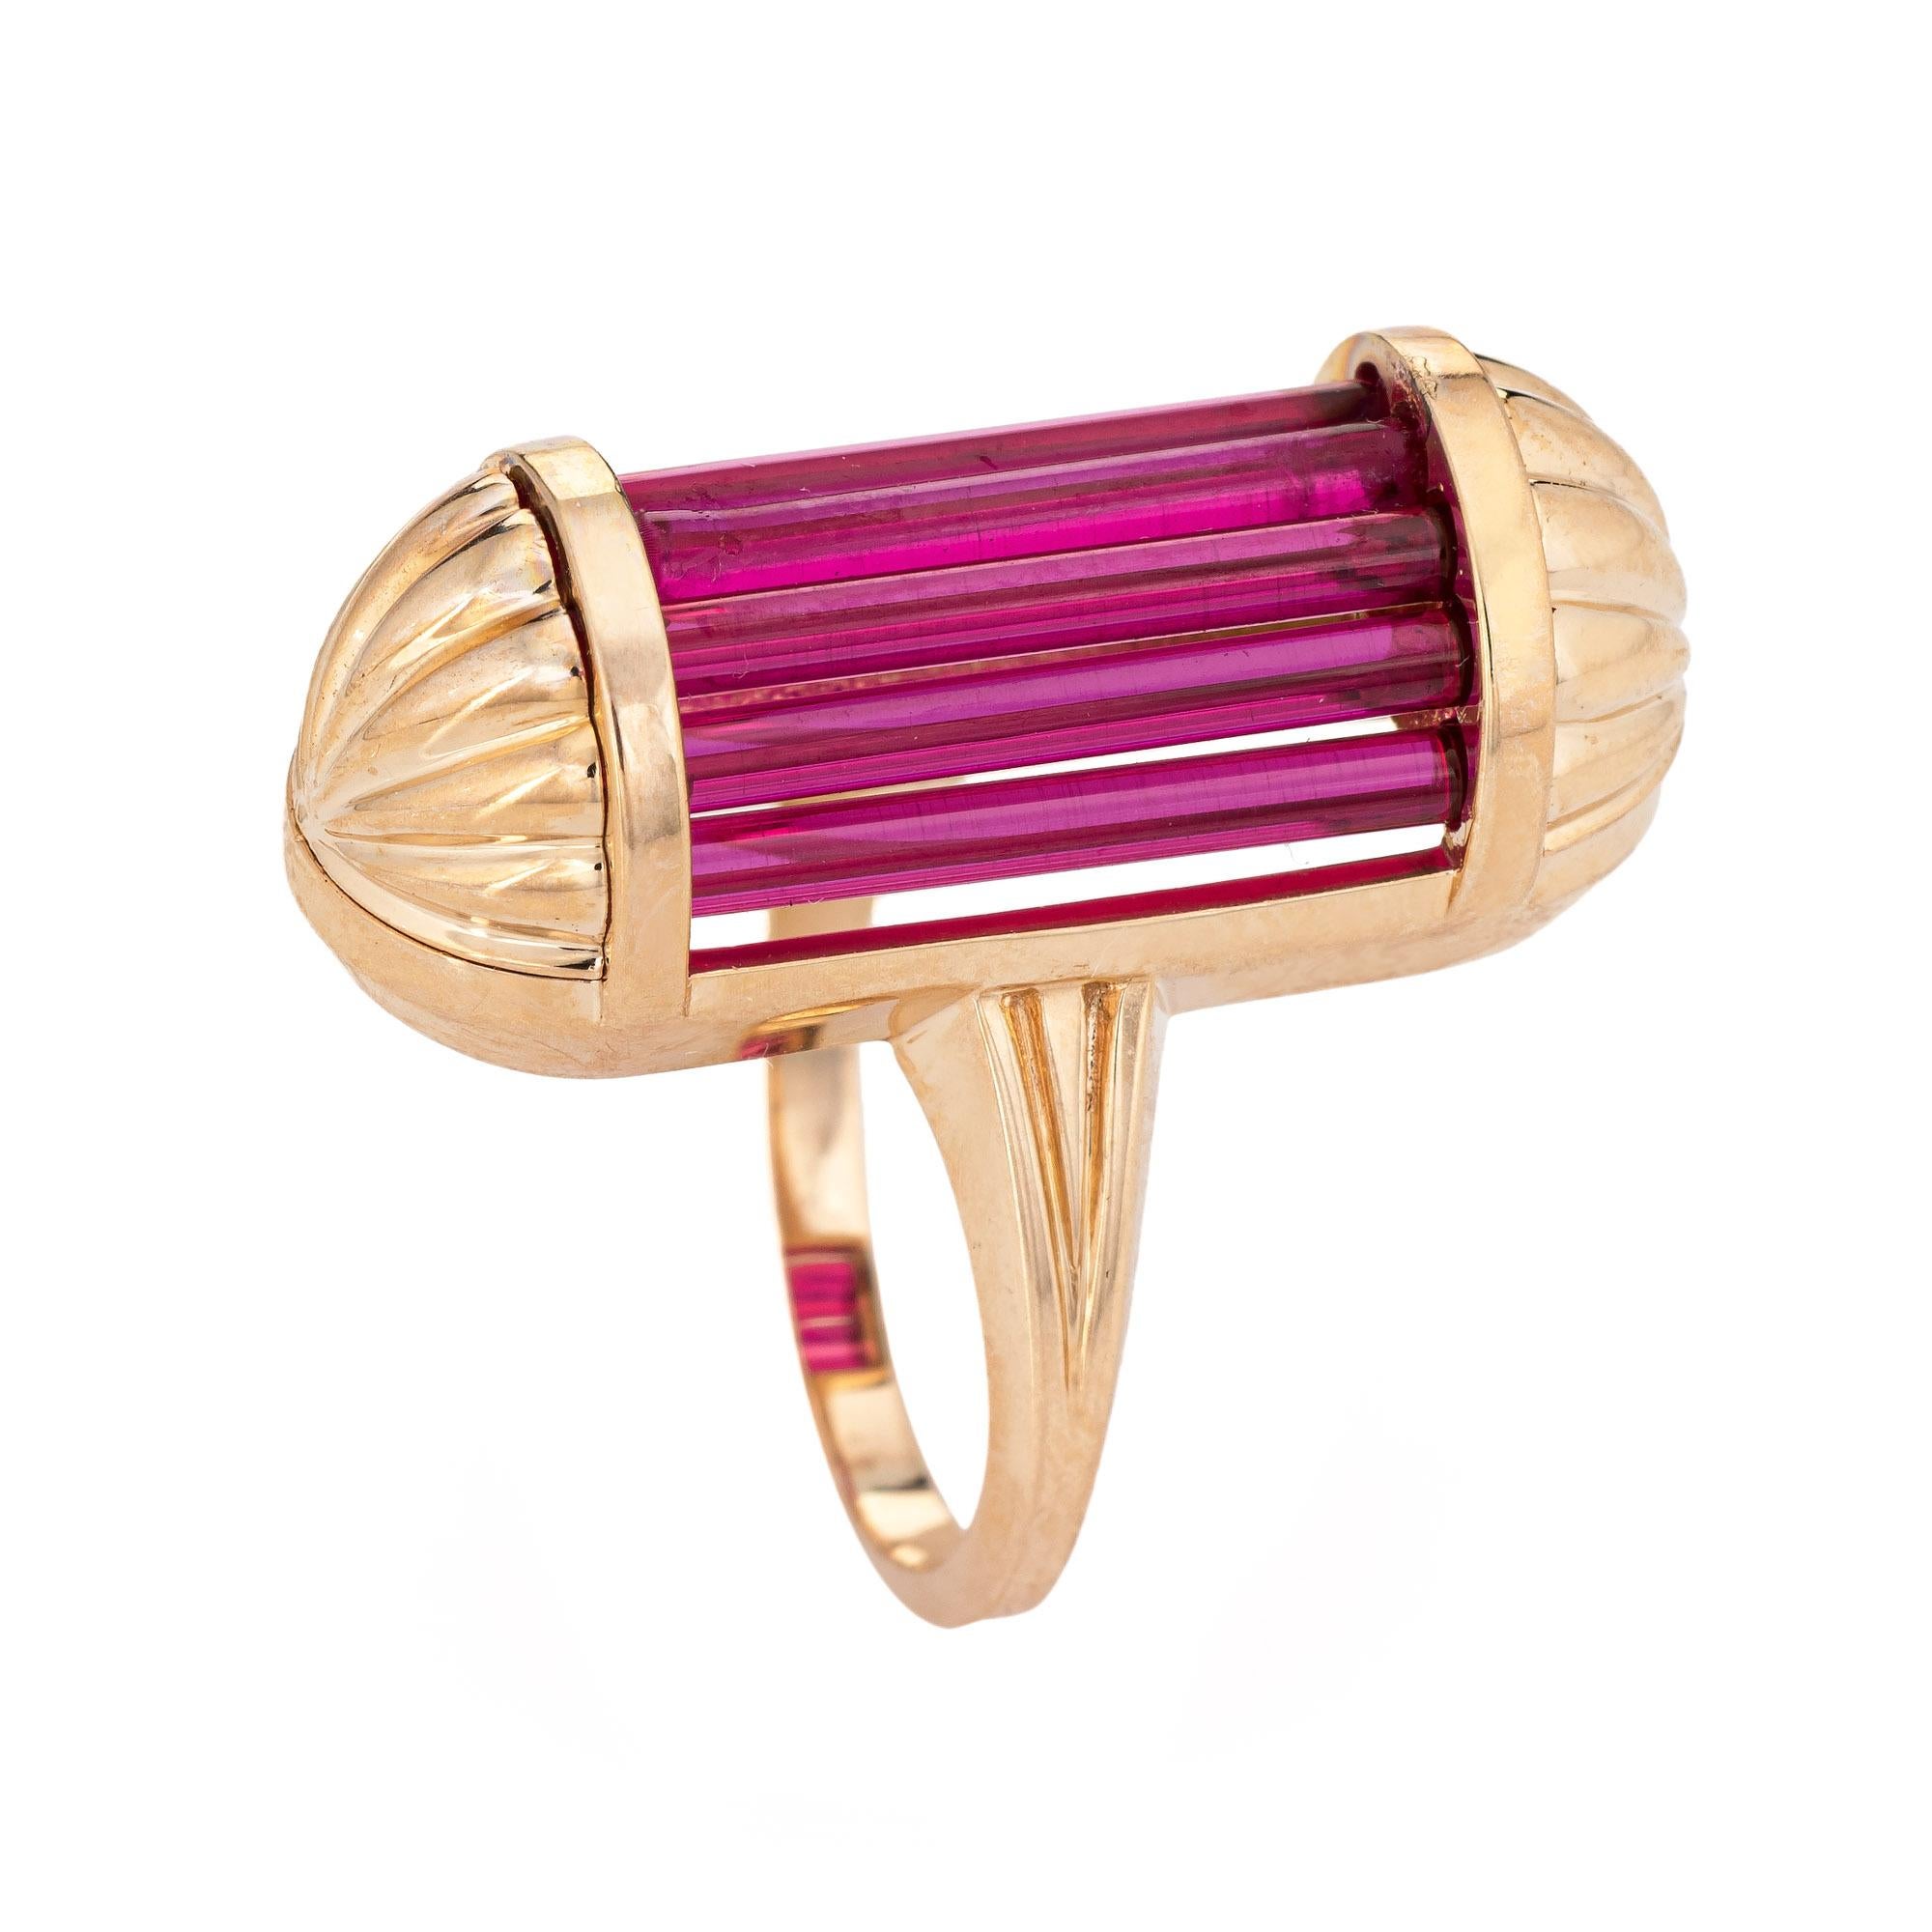 Stylish vintage barrel cocktail ring (circa 1940s to 1950s) crafted in 14 karat rose gold. 

Lab rubies measure 14mm x 2mm each (in excellent condition and free of cracks or chips). 

The unique ring features lab created rich red rubies set flush